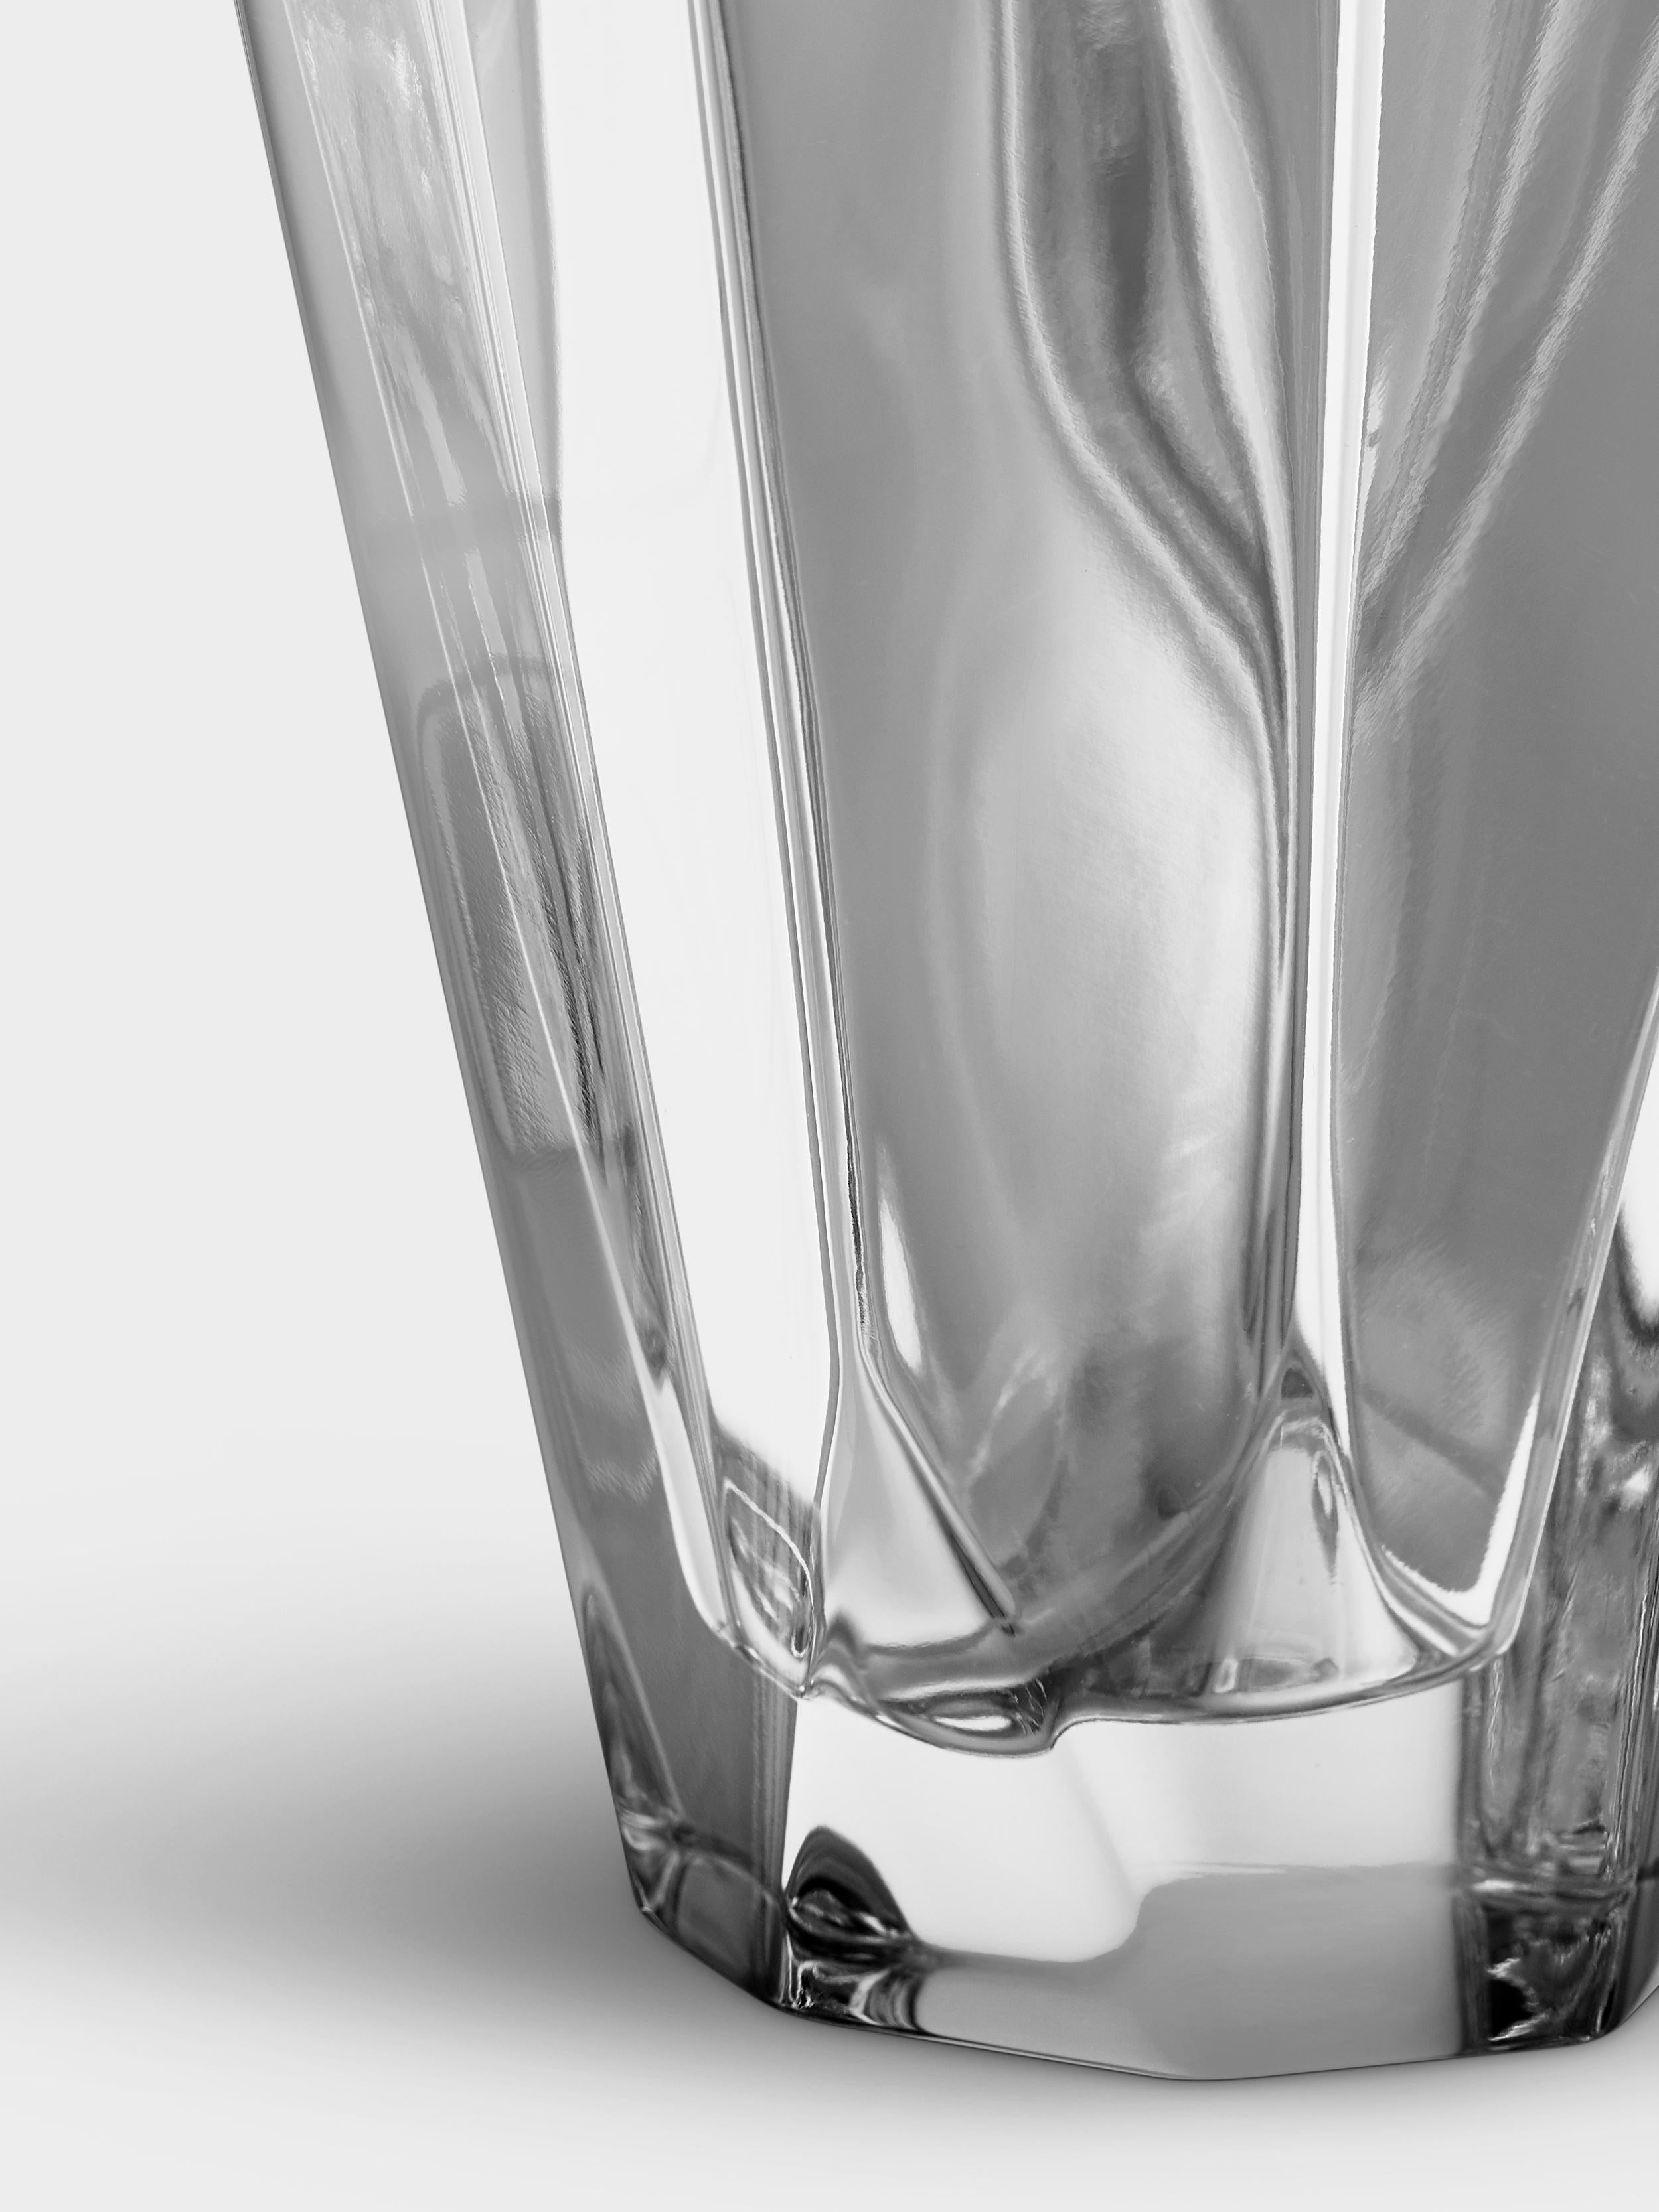 Precious Vase from Orrefors has an asymmetrical design that beautifully refracts the light reflected in the thick crystal. The small vase is a decorative centerpiece delivering an elegant feel to the home. Complement it with a bouquet of choice.